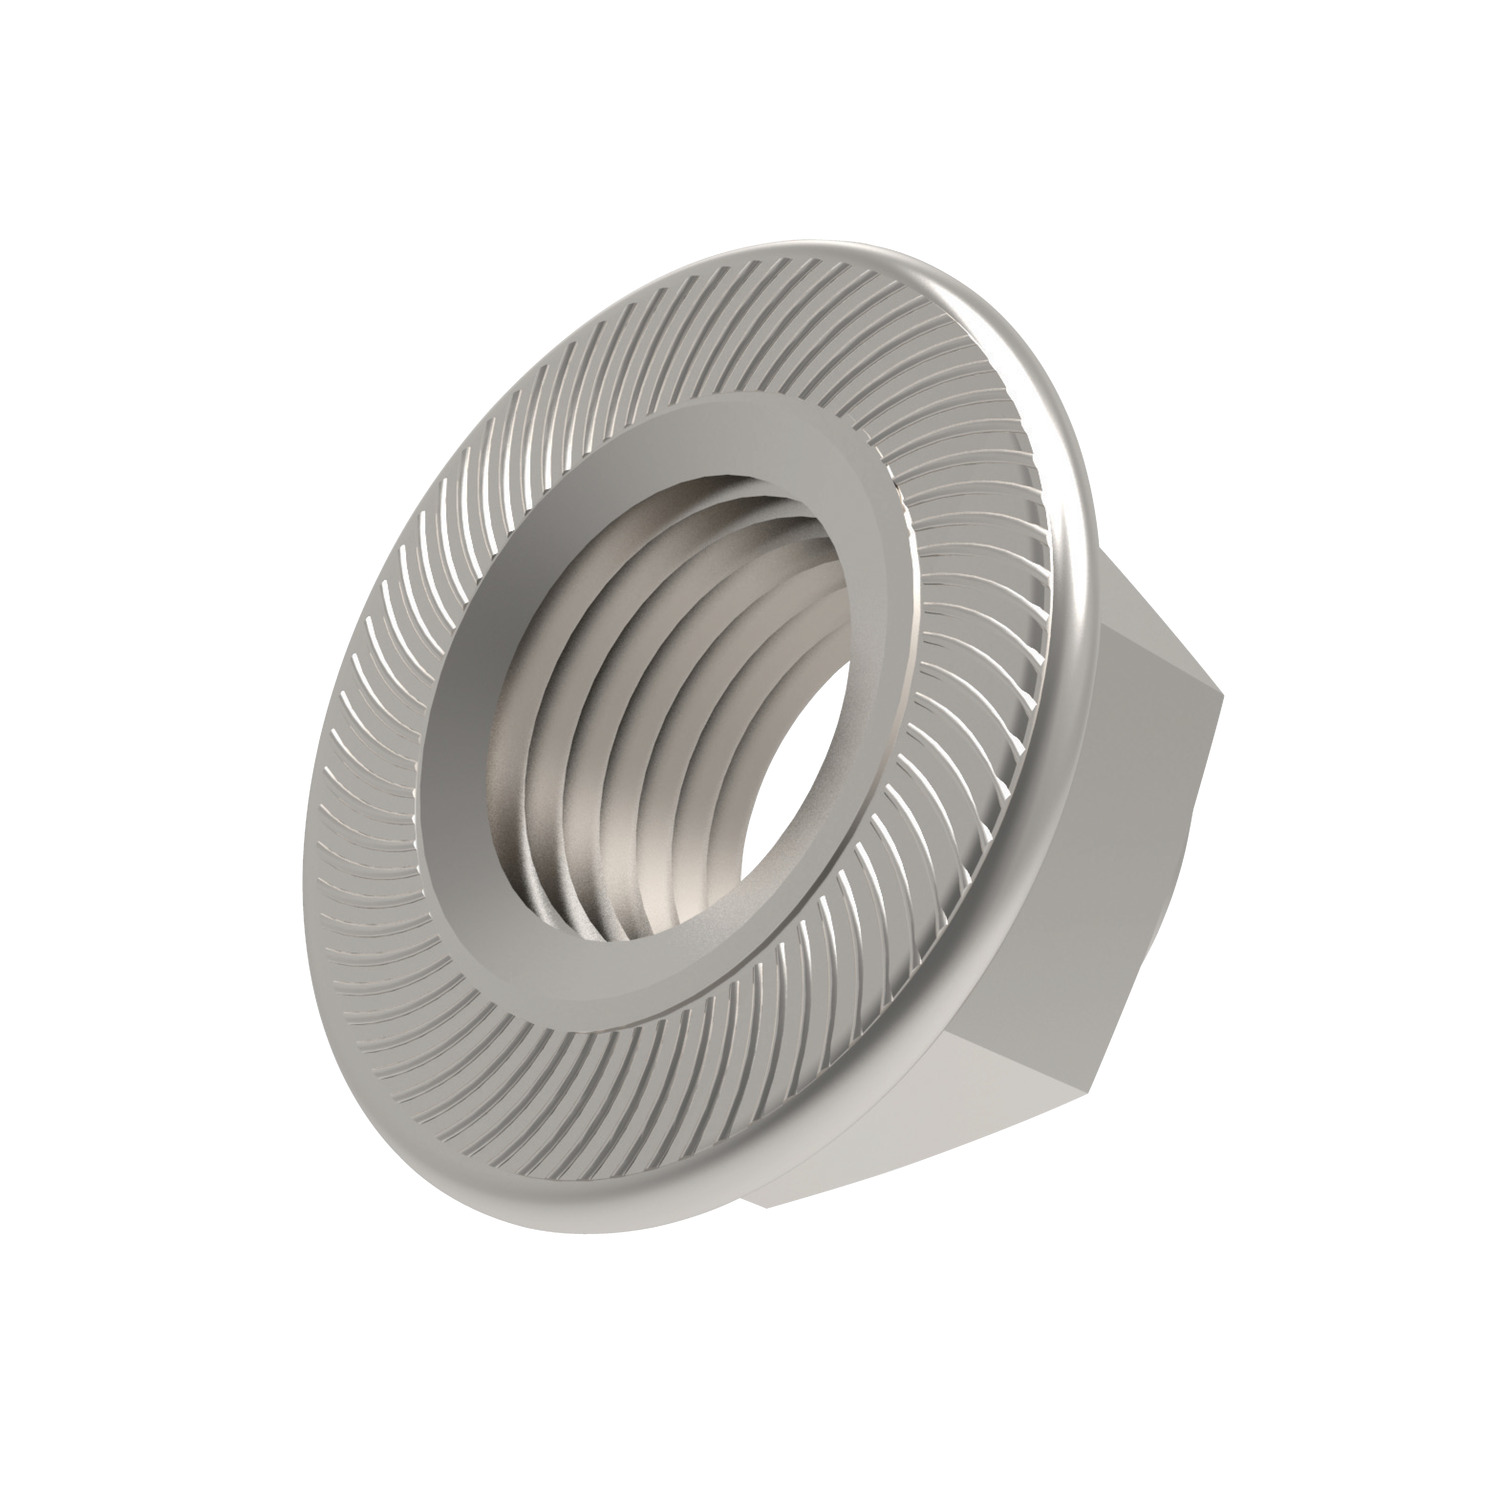 P0309.ZP Serrated Flanged Nuts